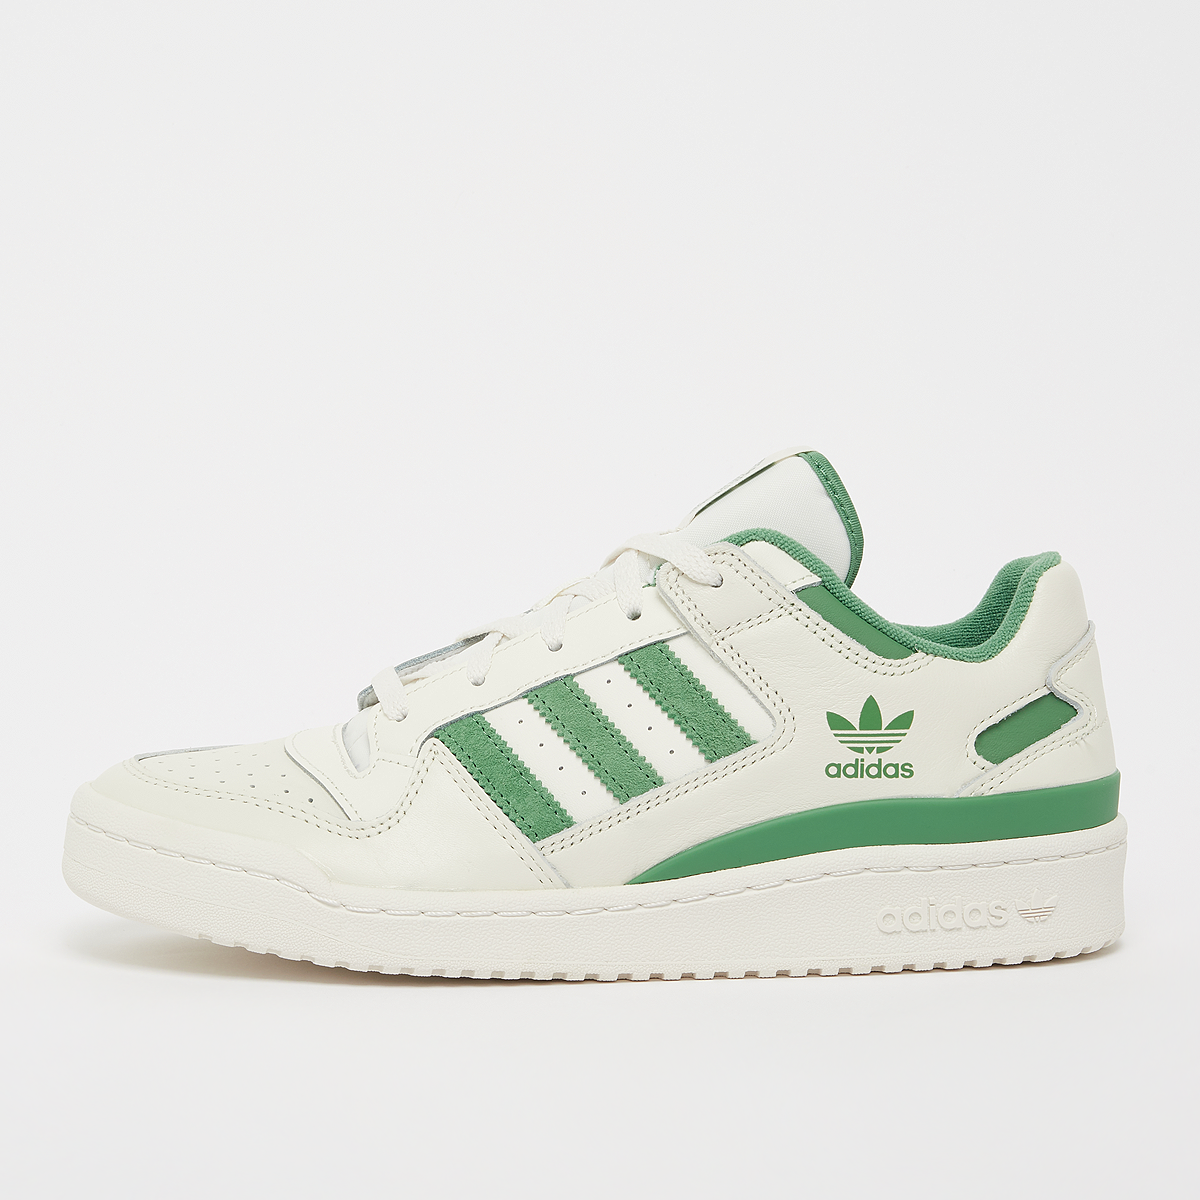 Sneaker Forum Low CL, adidas Originals, Footwear, cloud white/preloved green/cloud white, taille: 42